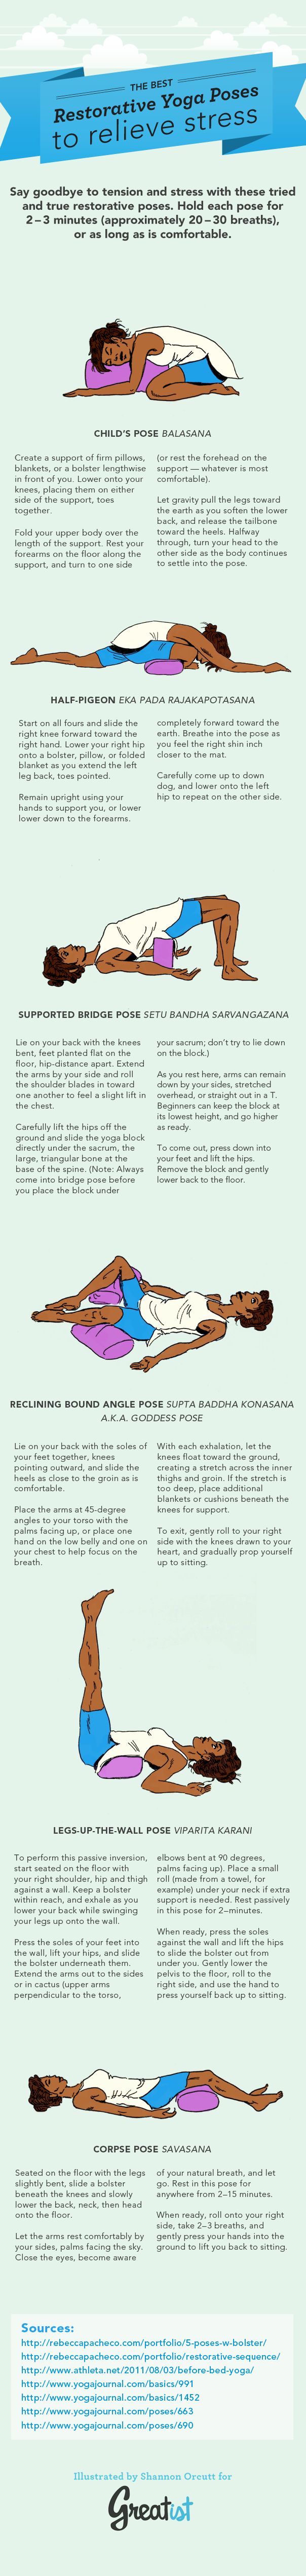 The Best Restorative Yoga Poses to Relieve Stress.